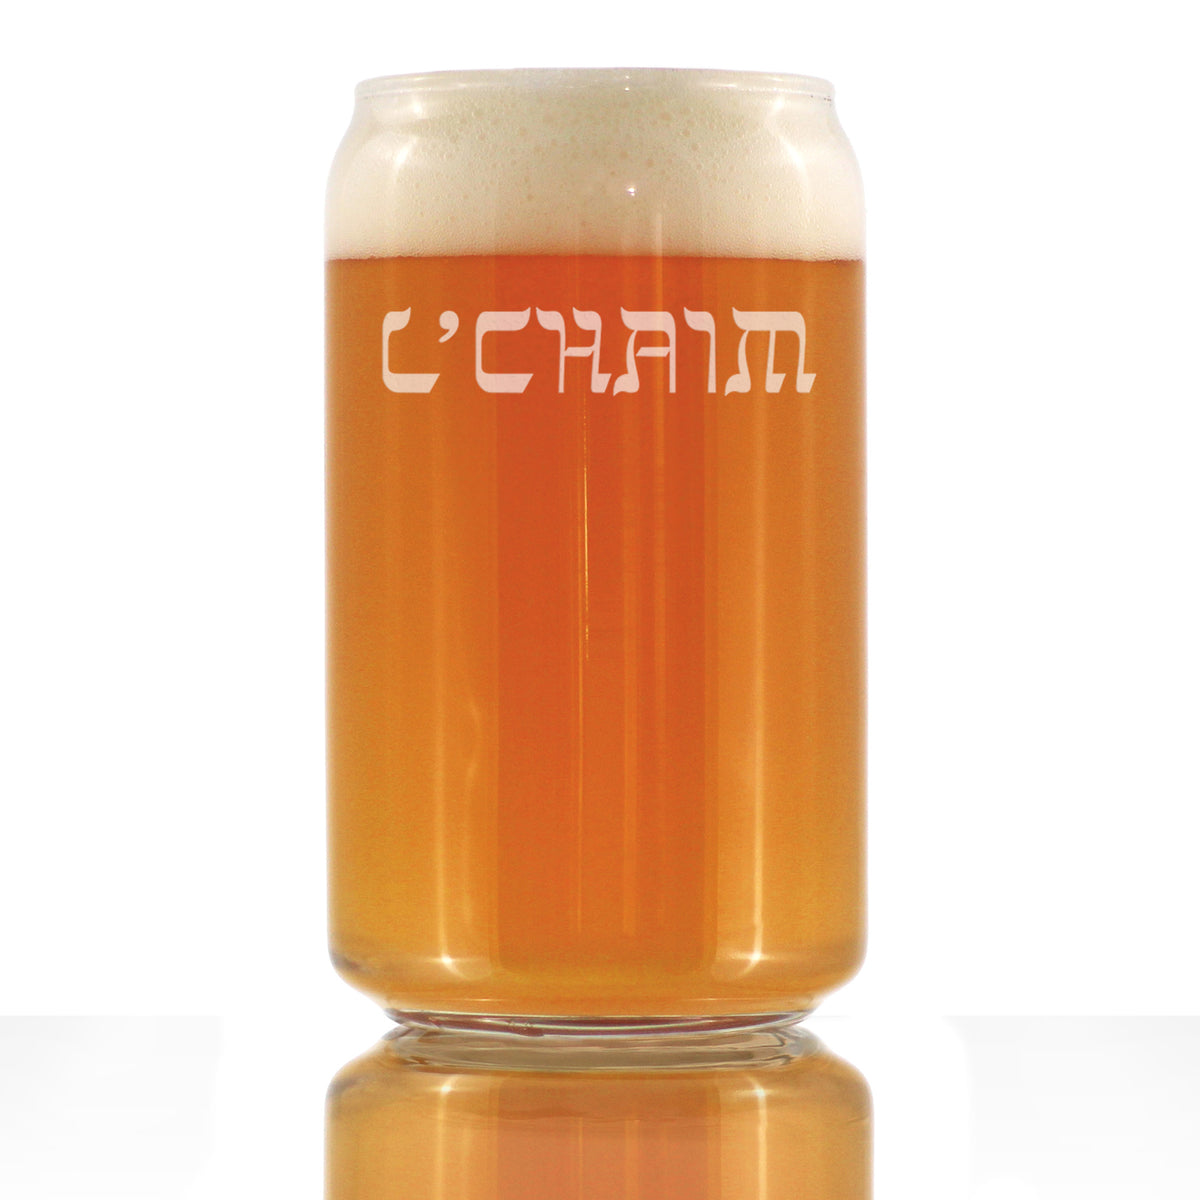 L&#39;Chaim - Hebrew Cheers Beer Can Pint Glass - Fun Jewish Gifts or Party Decor for Women &amp; Men - 16 Oz Glasses